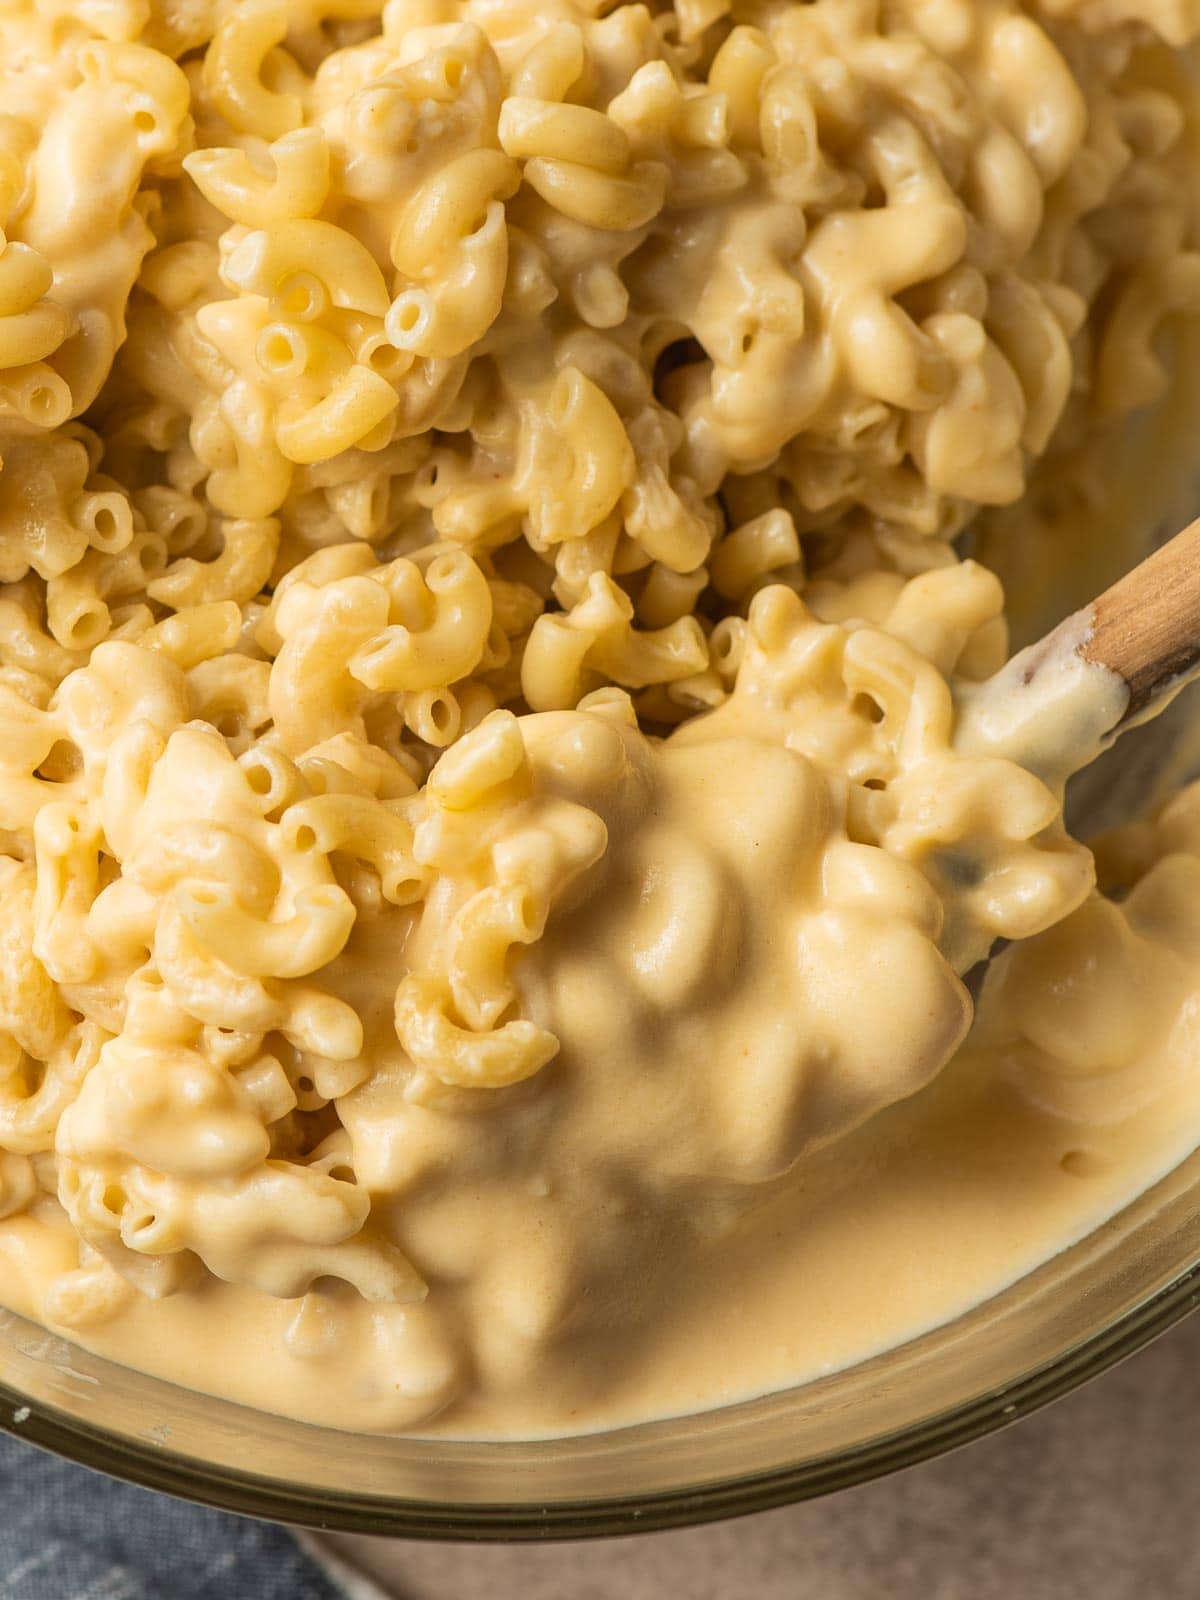 Bowl full of elbow macaroni being stirred into a creamy cheese sauce.